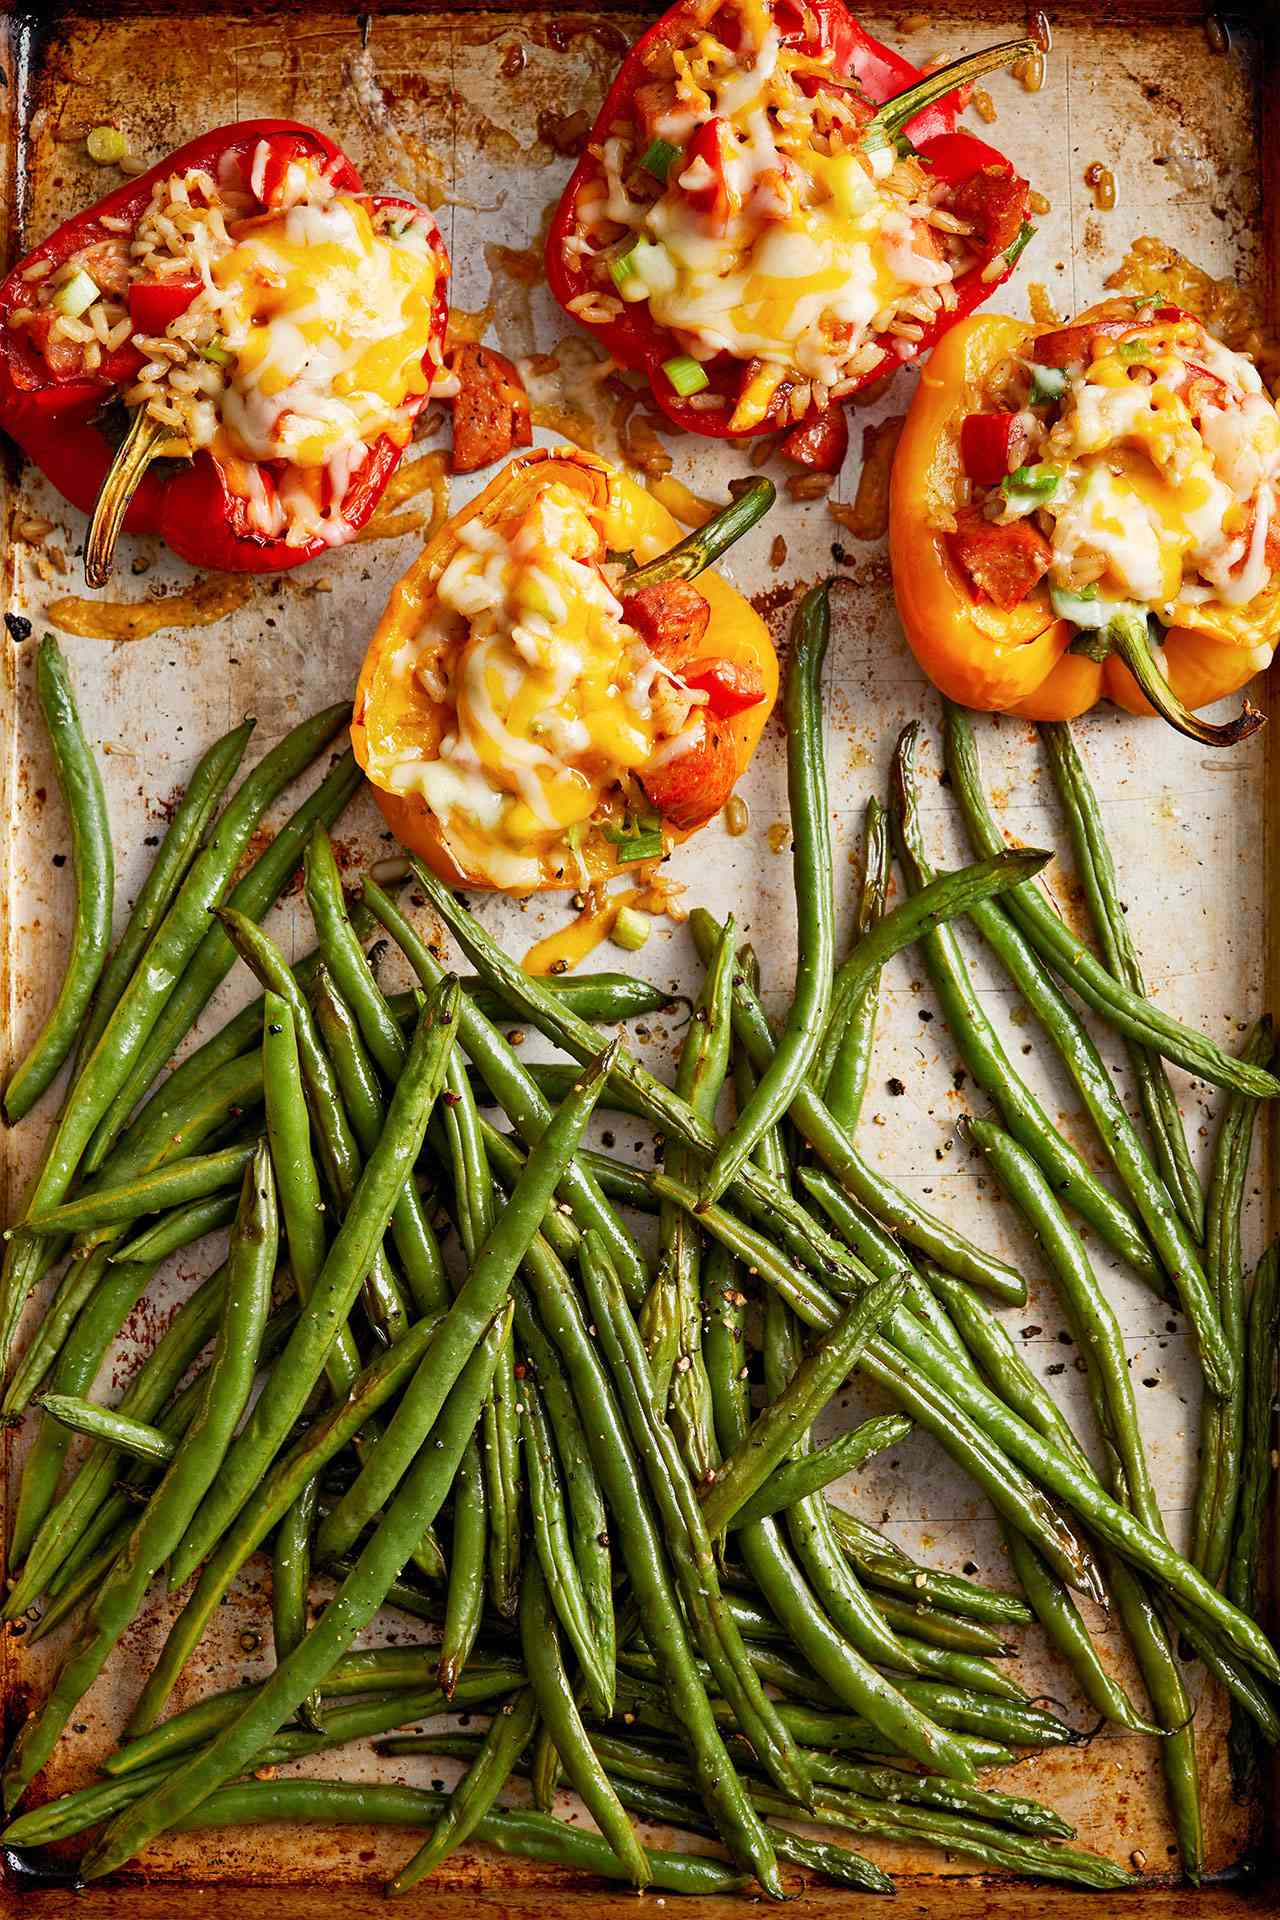 Chicken Andouille-Stuffed Peppers with Roasted Green Beans